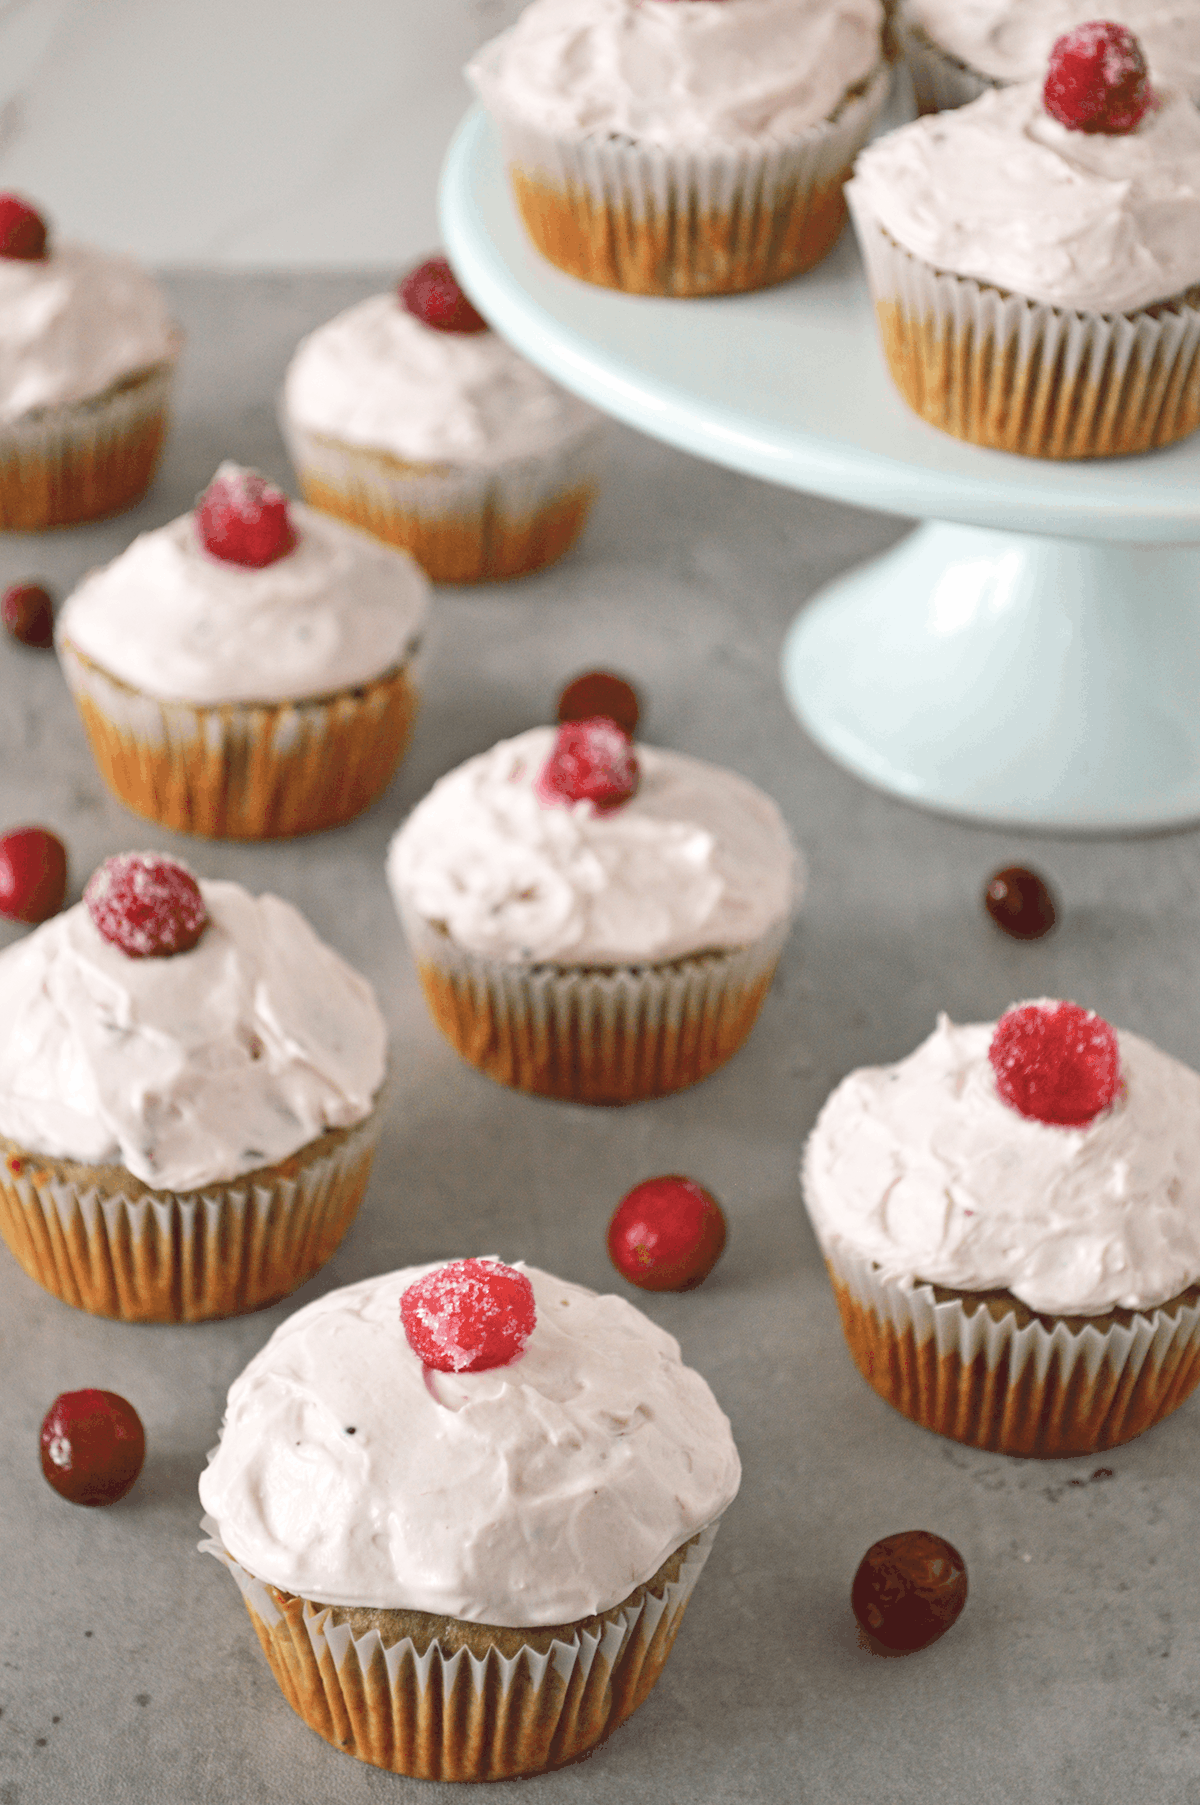 Cranberry cupcakes scattered on countertop.